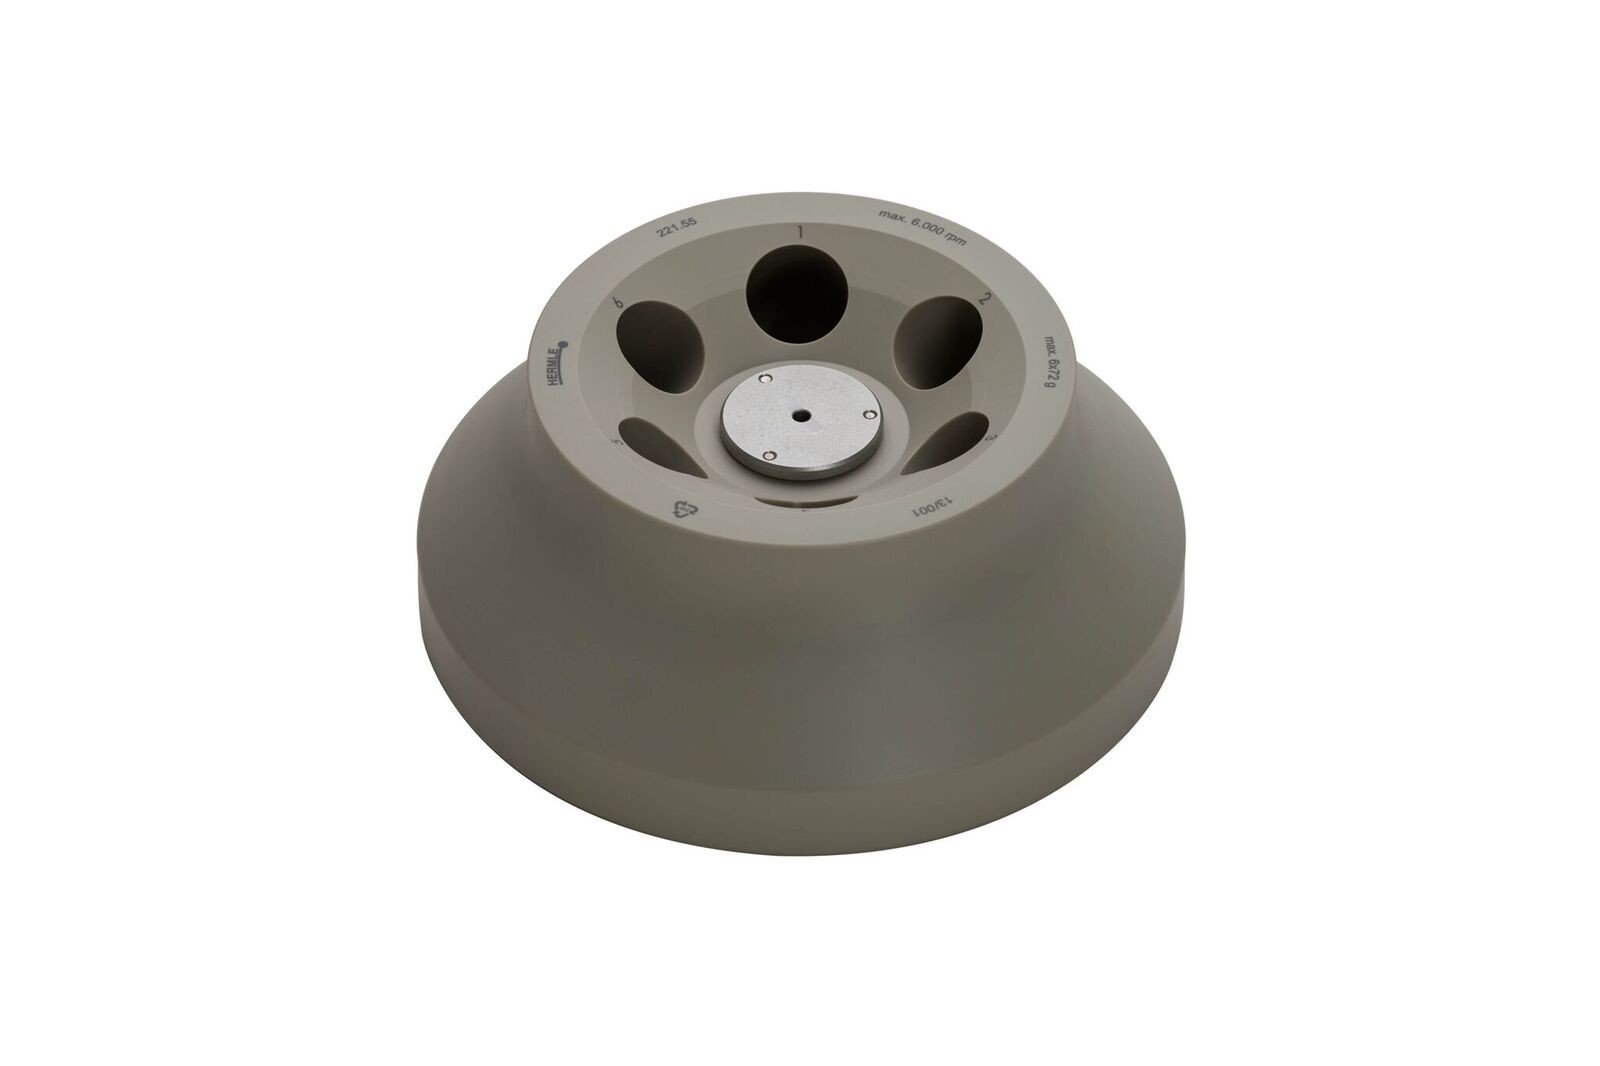 Hermle Angle Rotor 32° for 6 x 50 ml RB or Falcon tubes; Ø 30 mm for Small Centrifuge Z 206 A